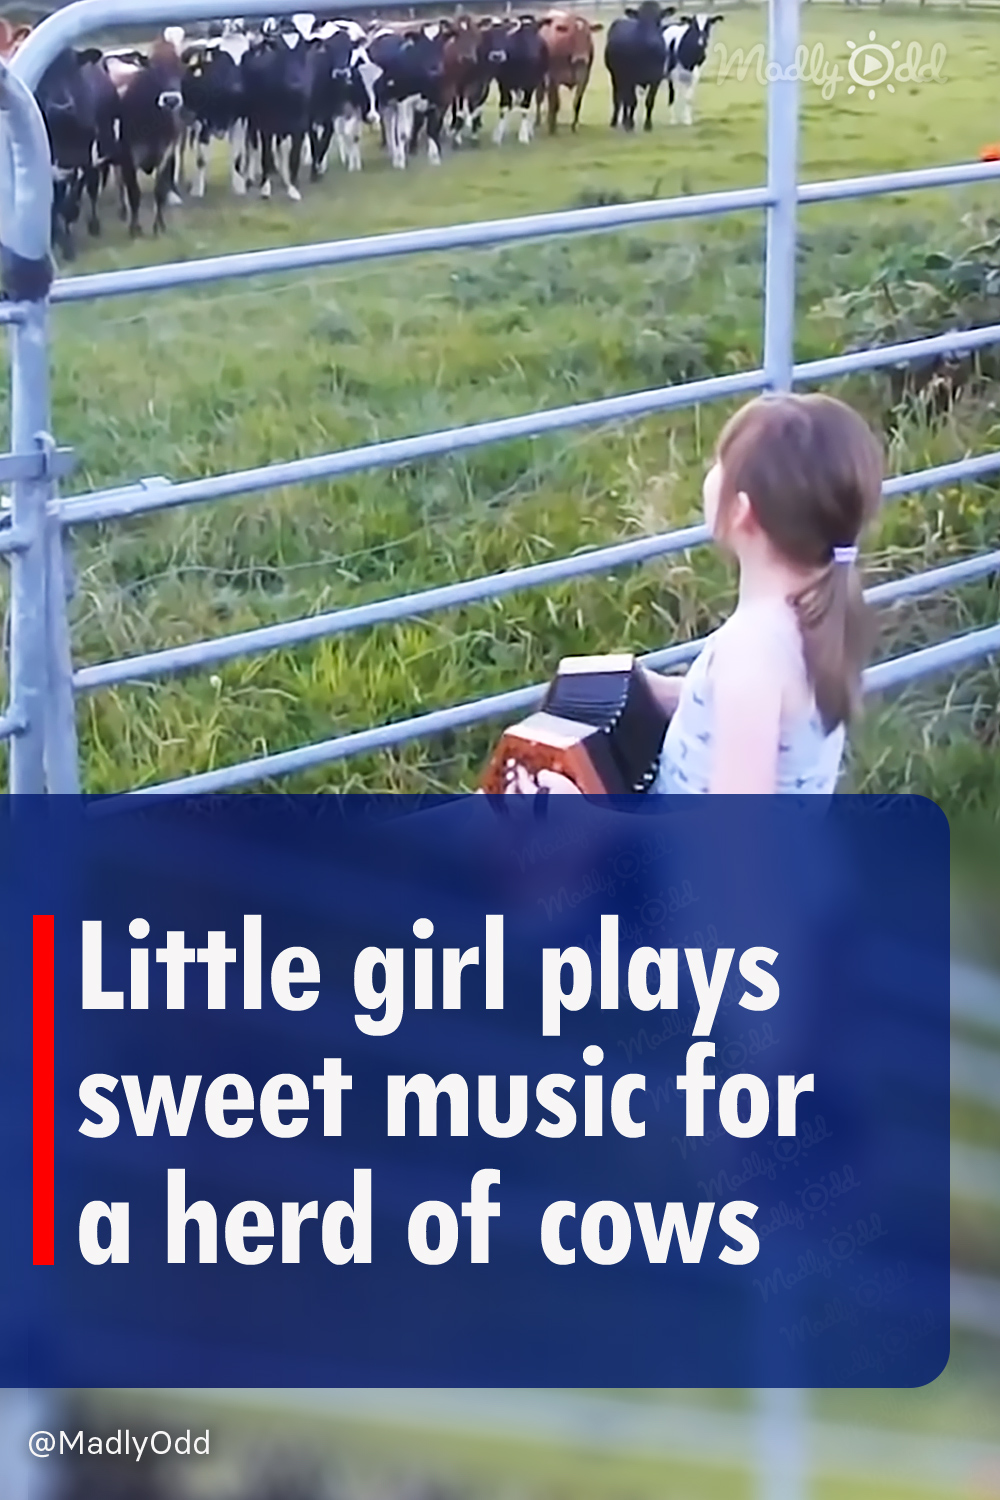 Little girl plays sweet music for a herd of cows